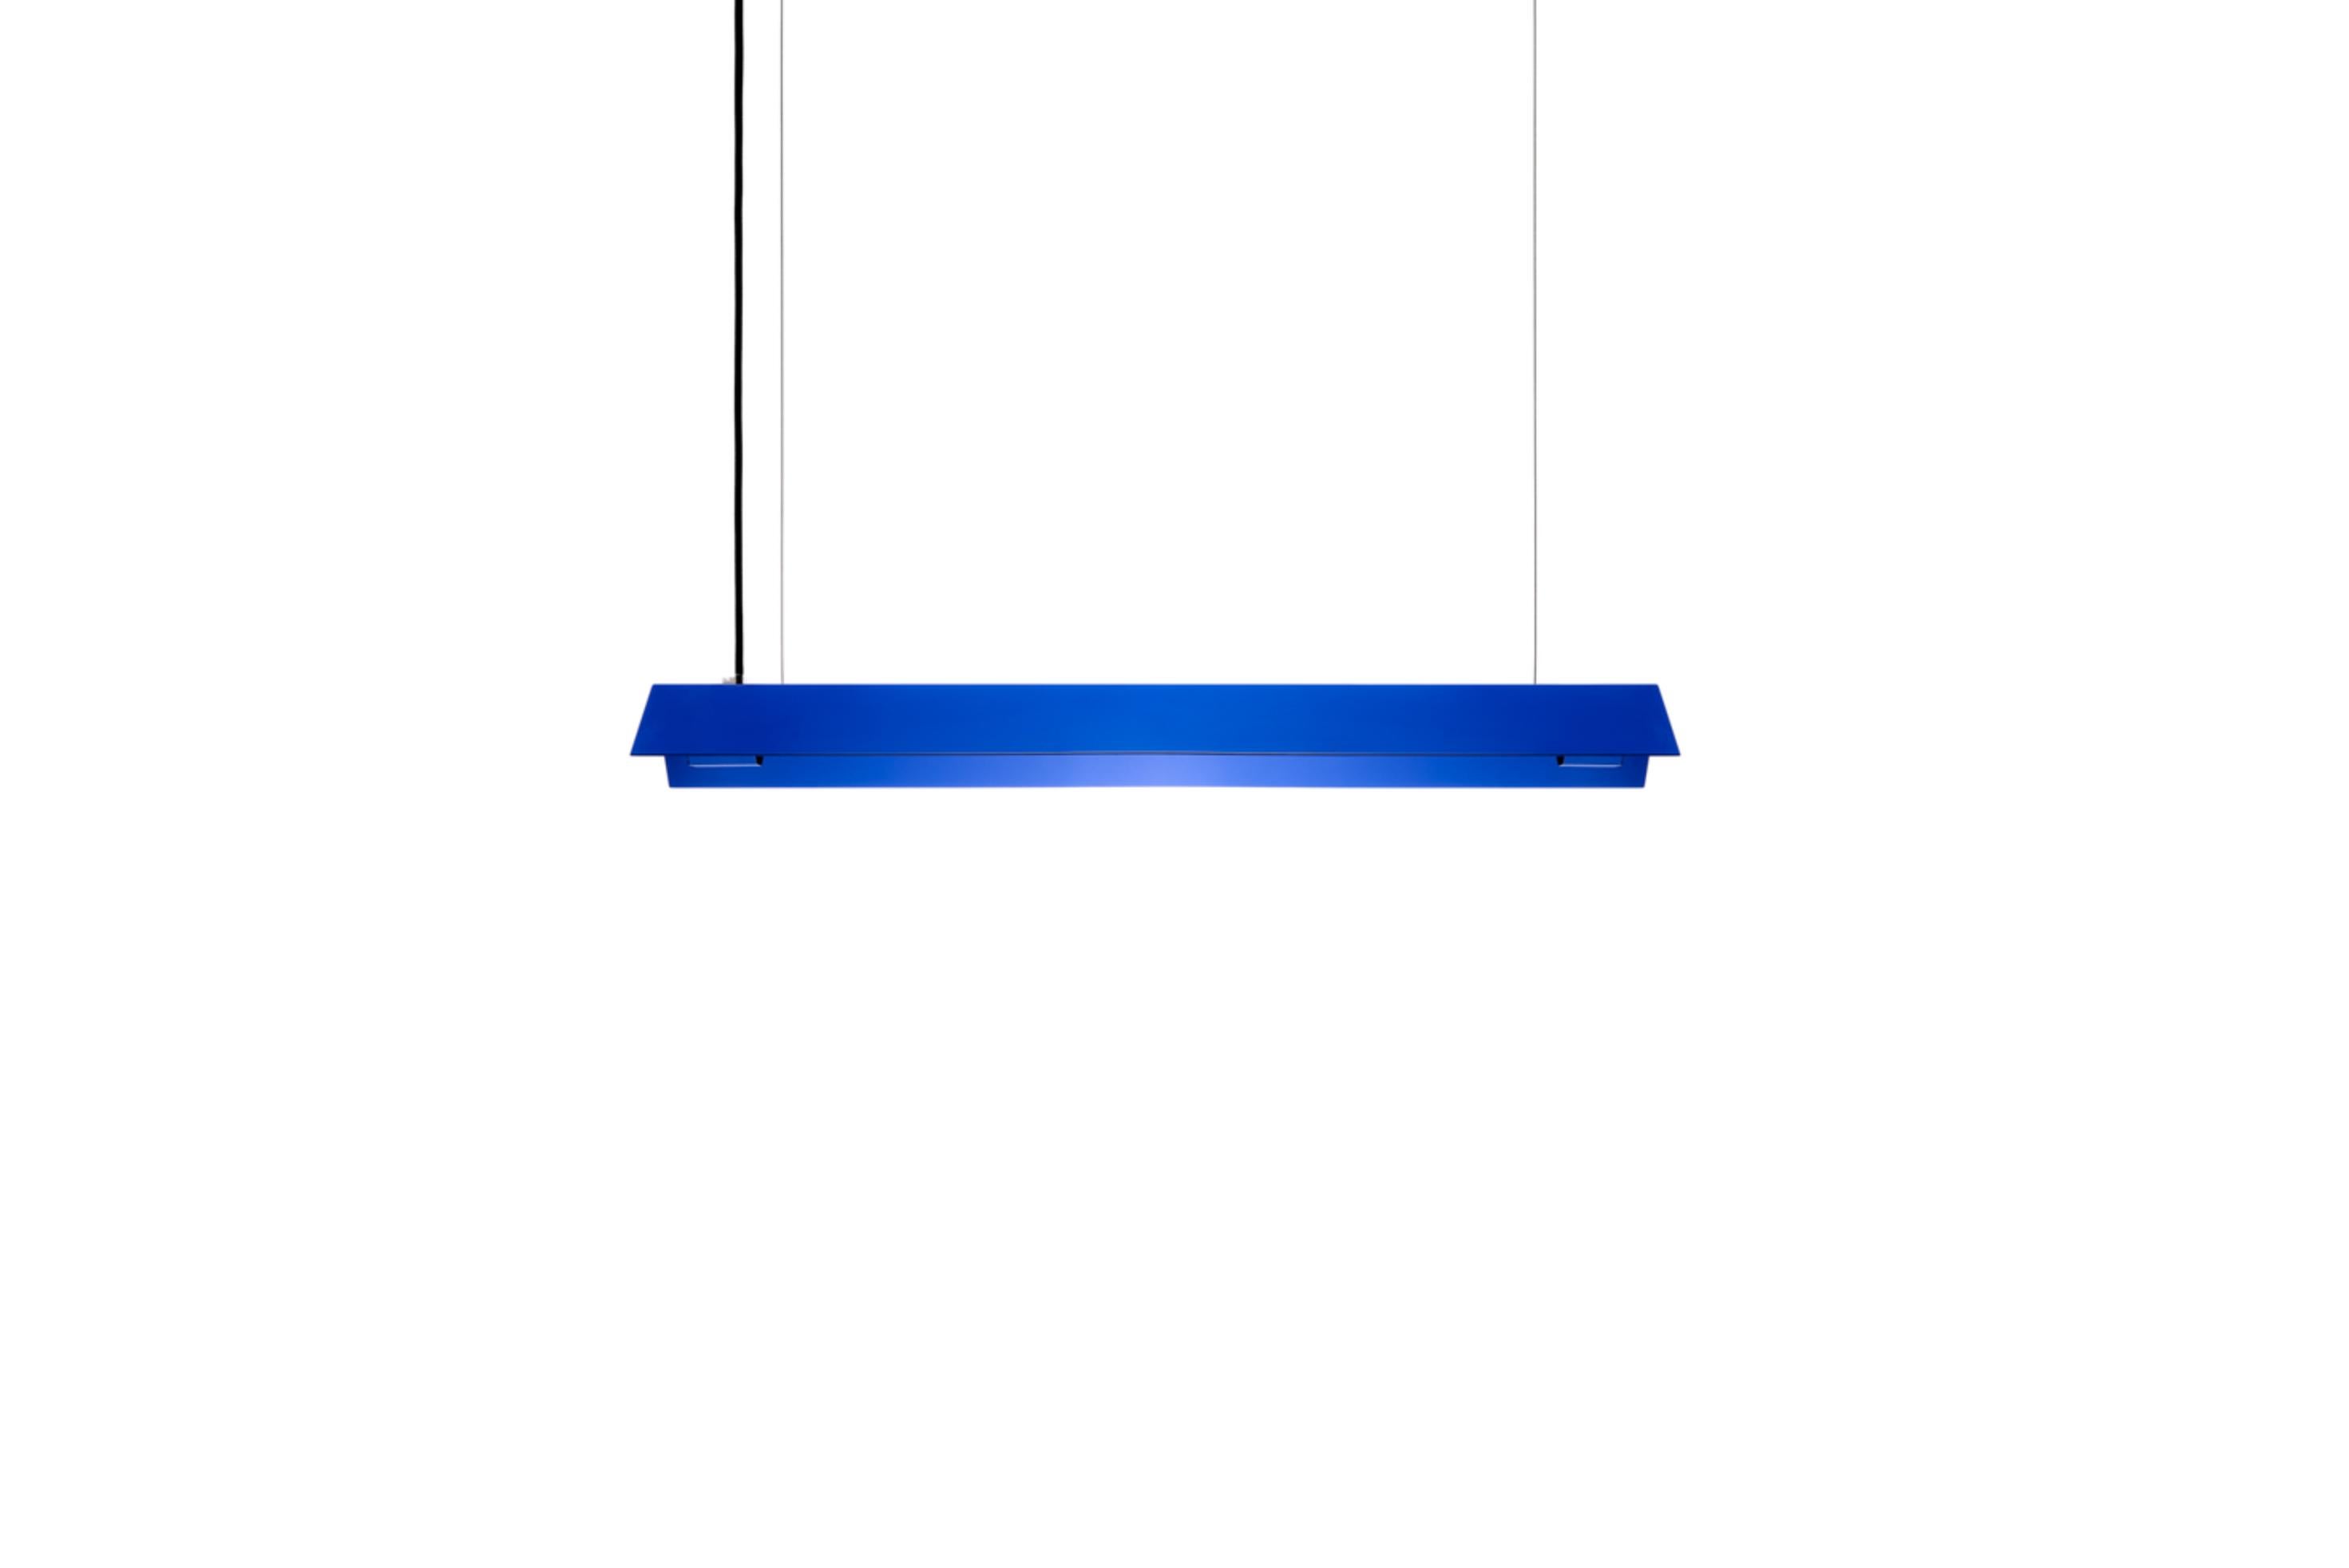 Small Misalliance ral ultramarine suspended light by lexavala.
Dimensions: D 16 x W 70 x H 8 cm
Materials: powder coated aluminium.

There are two lenghts of socket covers, extending over the LED. Two short are to be found in Suspended and